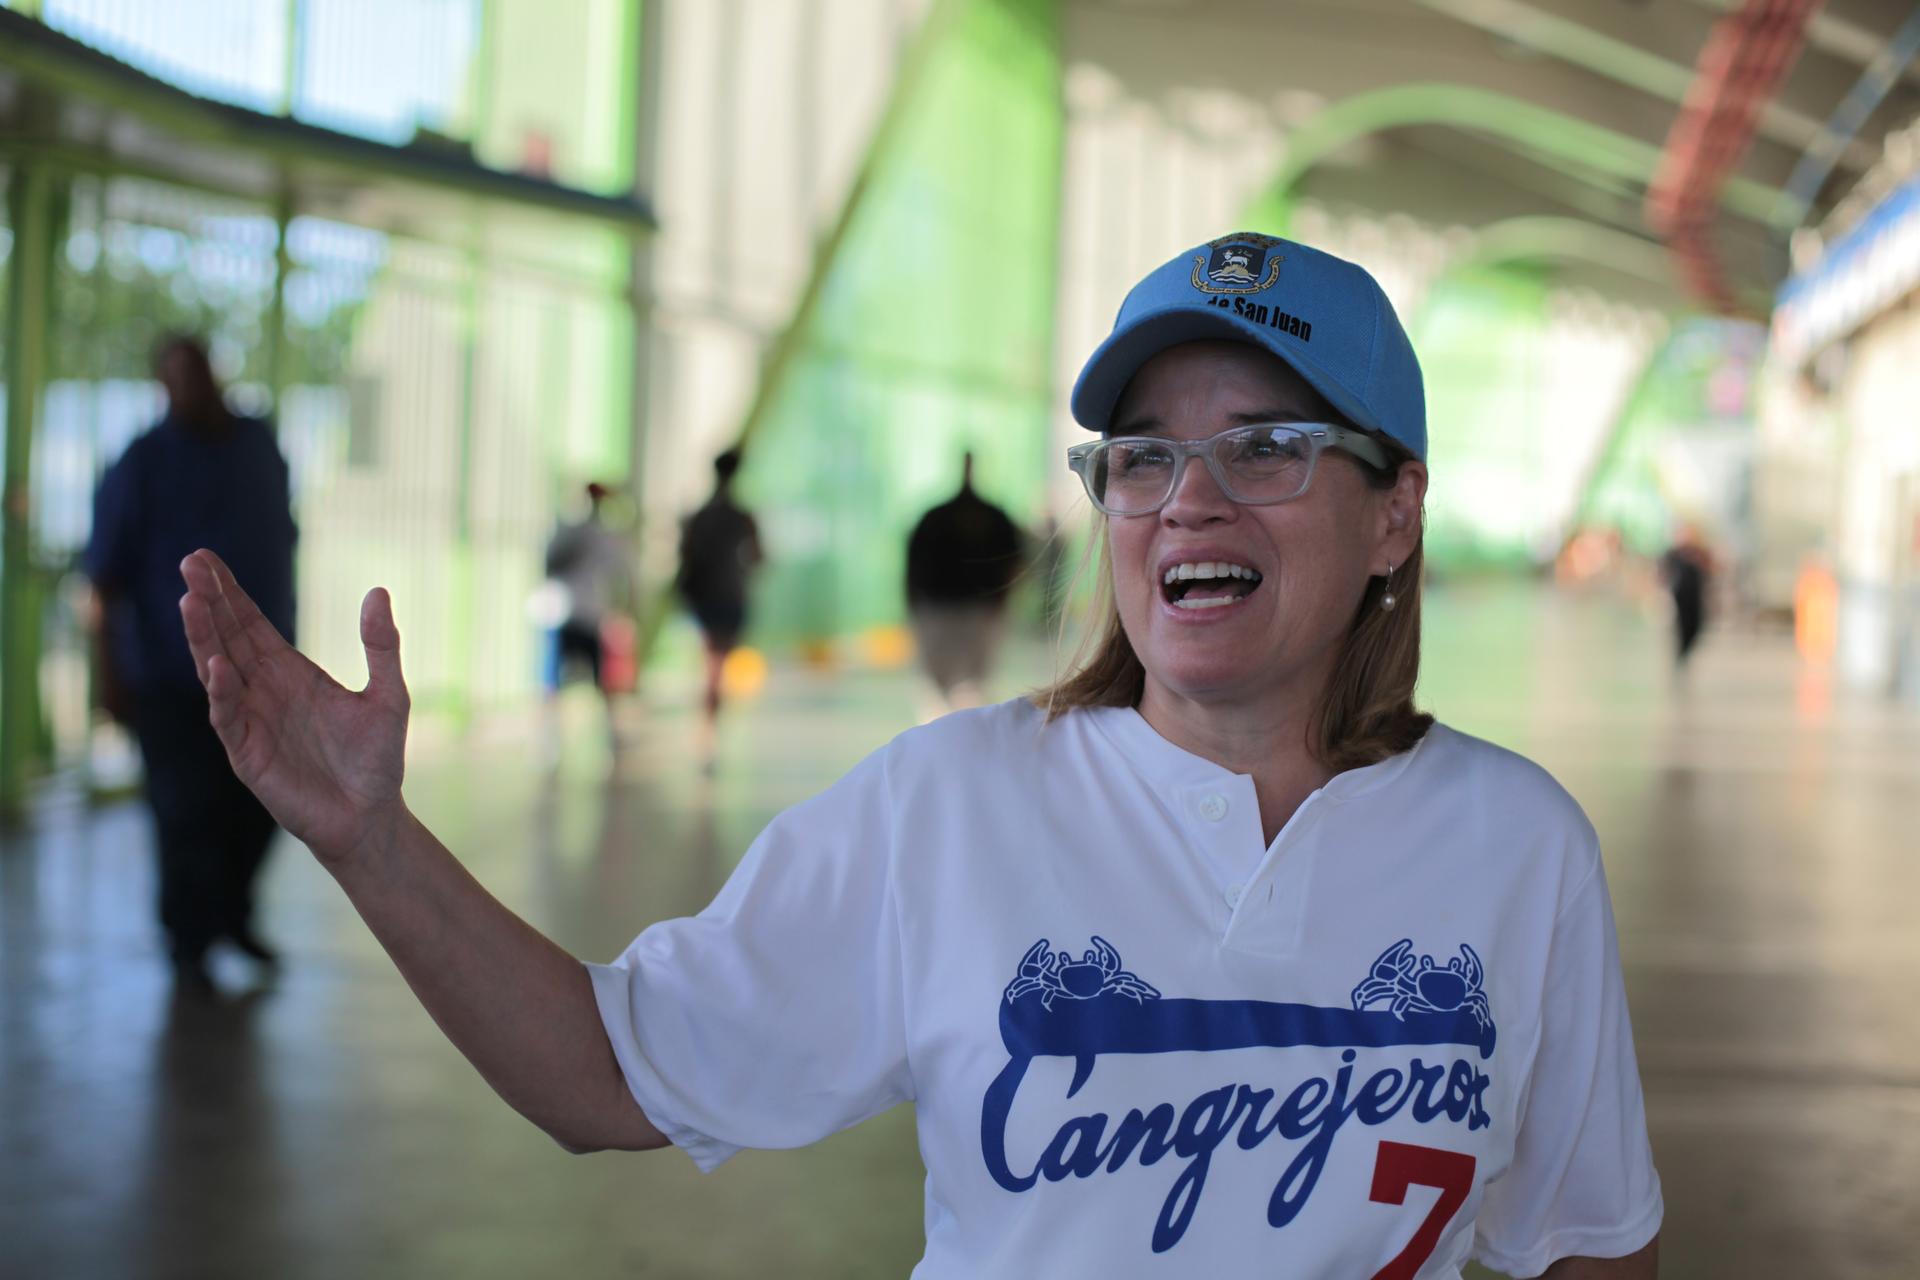 San Juan Mayor Carmen Yulin Cruz speakingafter throwing the cermonial first pitch at a celebrity baseball game. Yulin dreams of transforming the city’s electric supply and thinks solar has real promise as part of that effort.